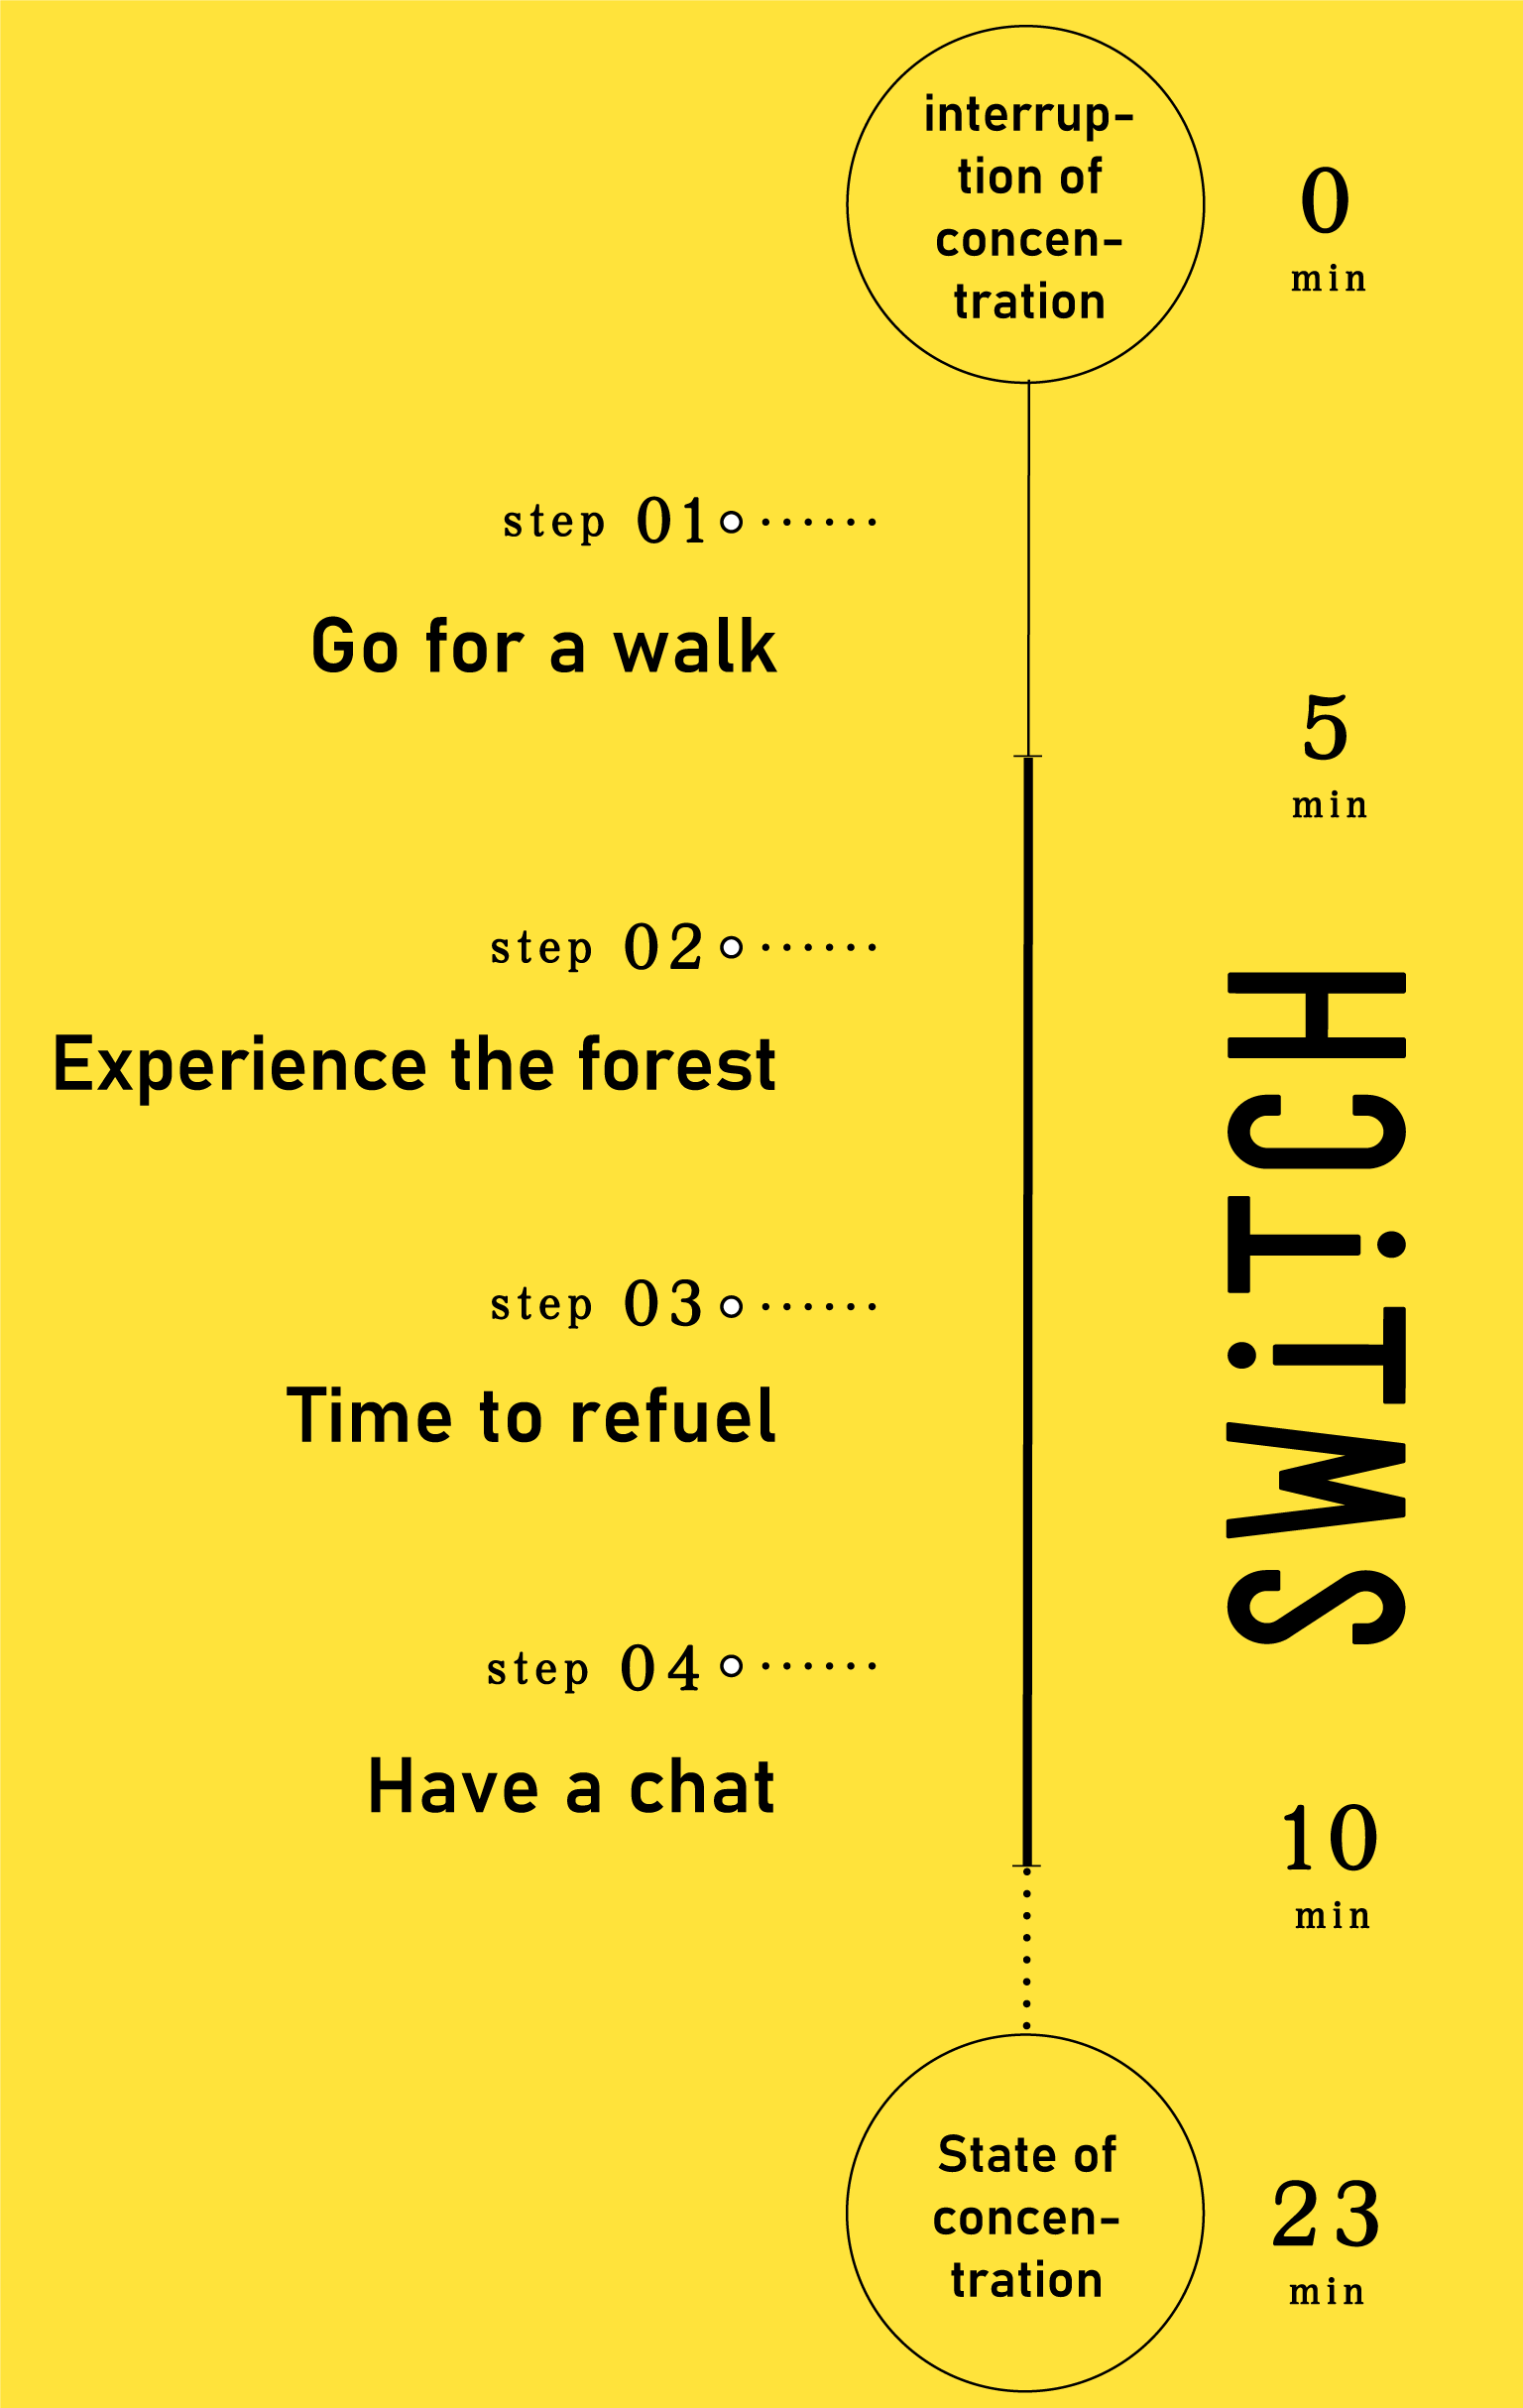 Illustration: Four Brain Switch Steps　Step01-Go for a walk, Step02-Experience the forest, Step03-Time to refuel,Step04-Have a chat